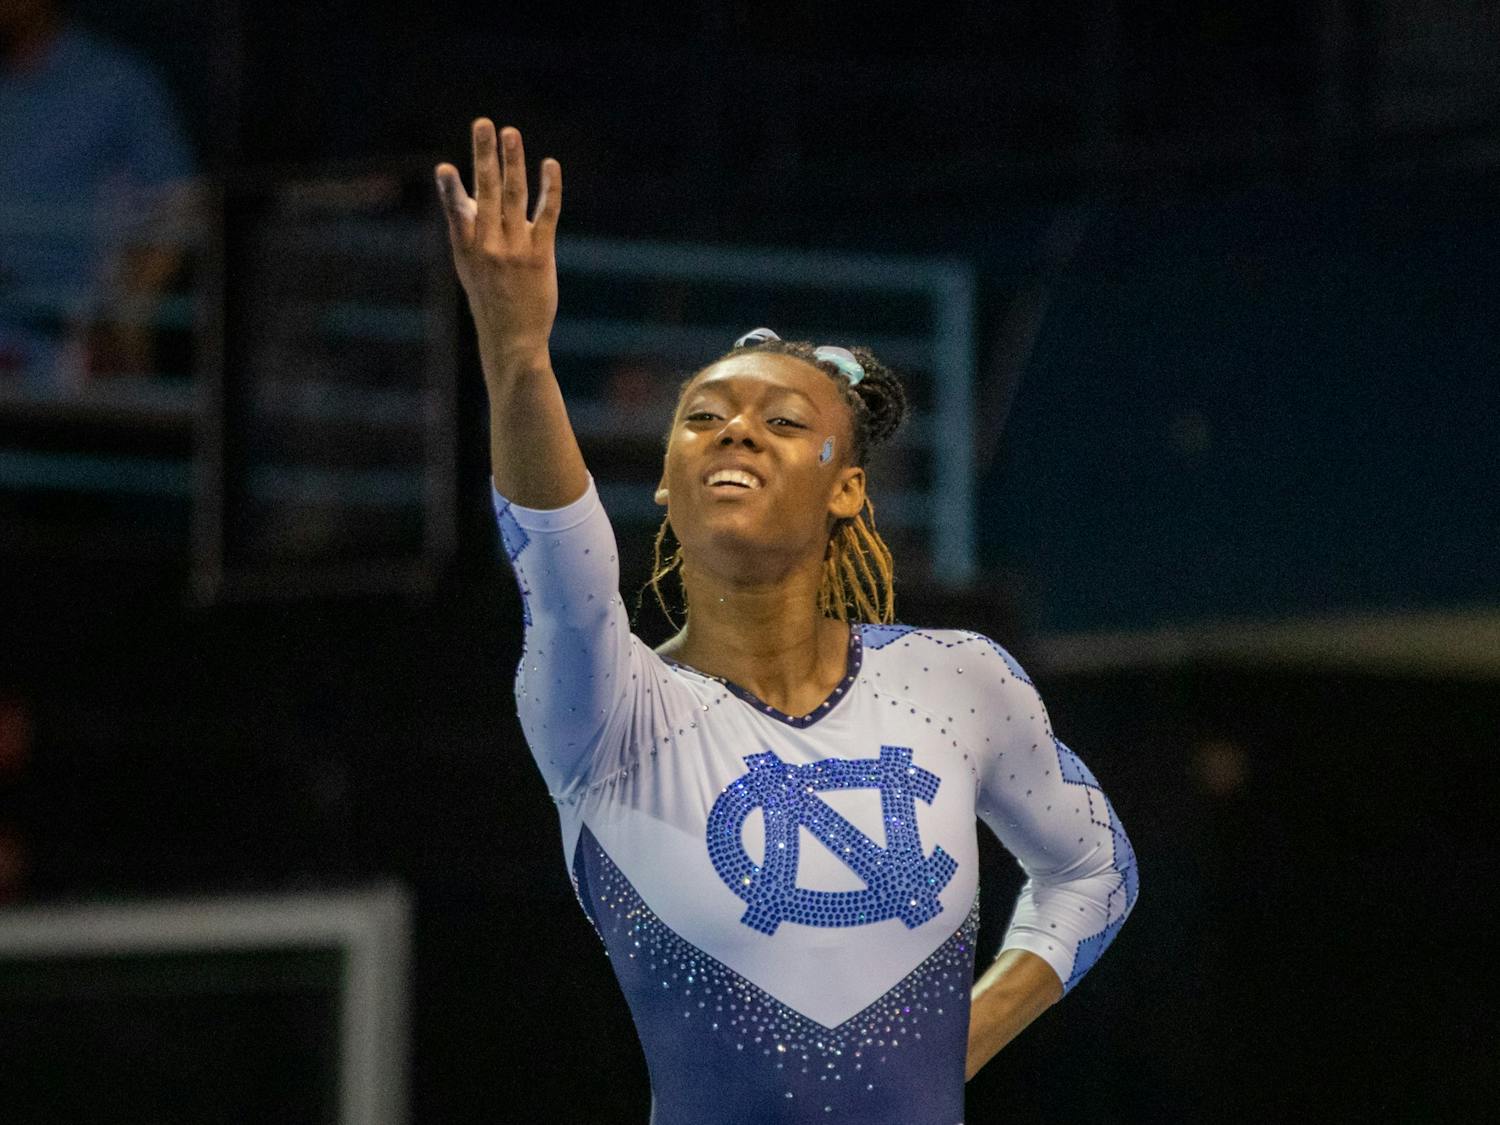 Senior Shailyn St. Brice performs her floor routine during the Tar Heels' meet against West Virginia at Carmichael Arena on Feb. 24th, 2022. UNC lost 195.225 - 196.250.